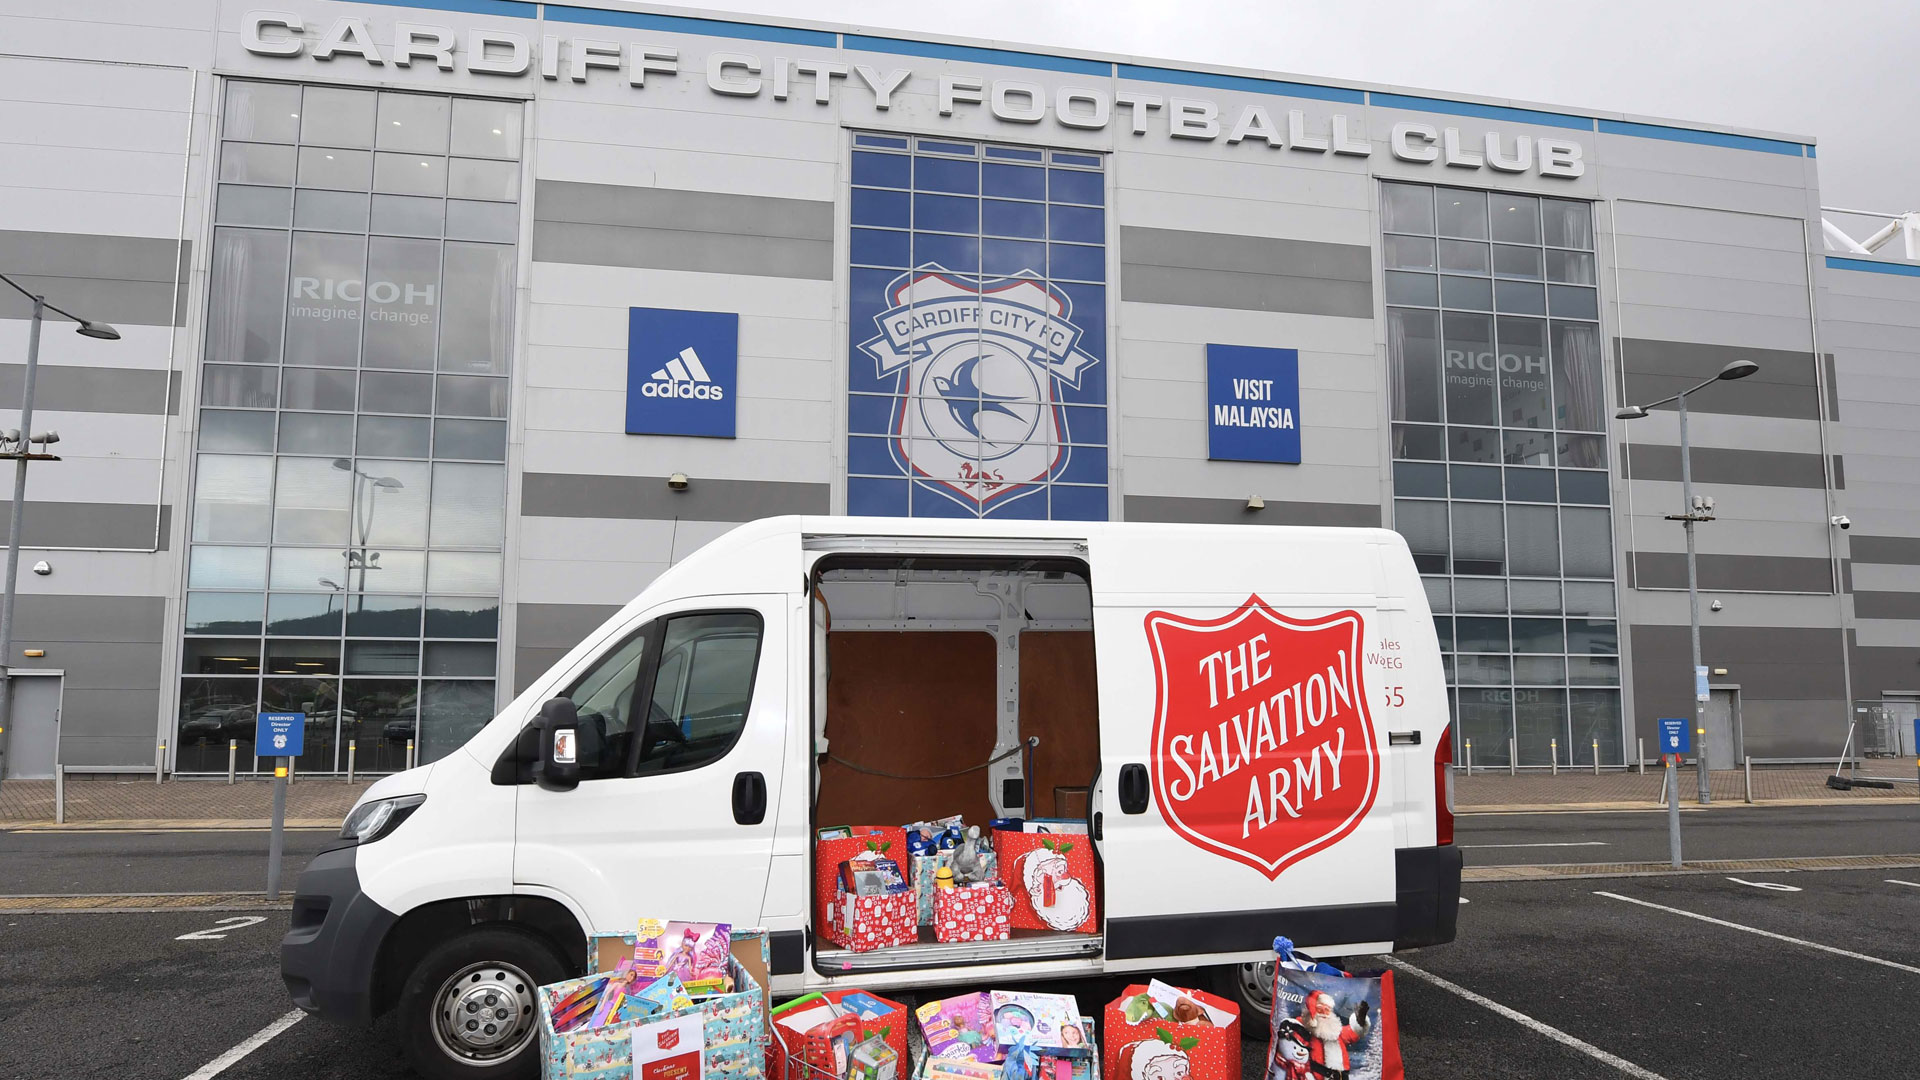 Cardiff City support The Salvation Army...